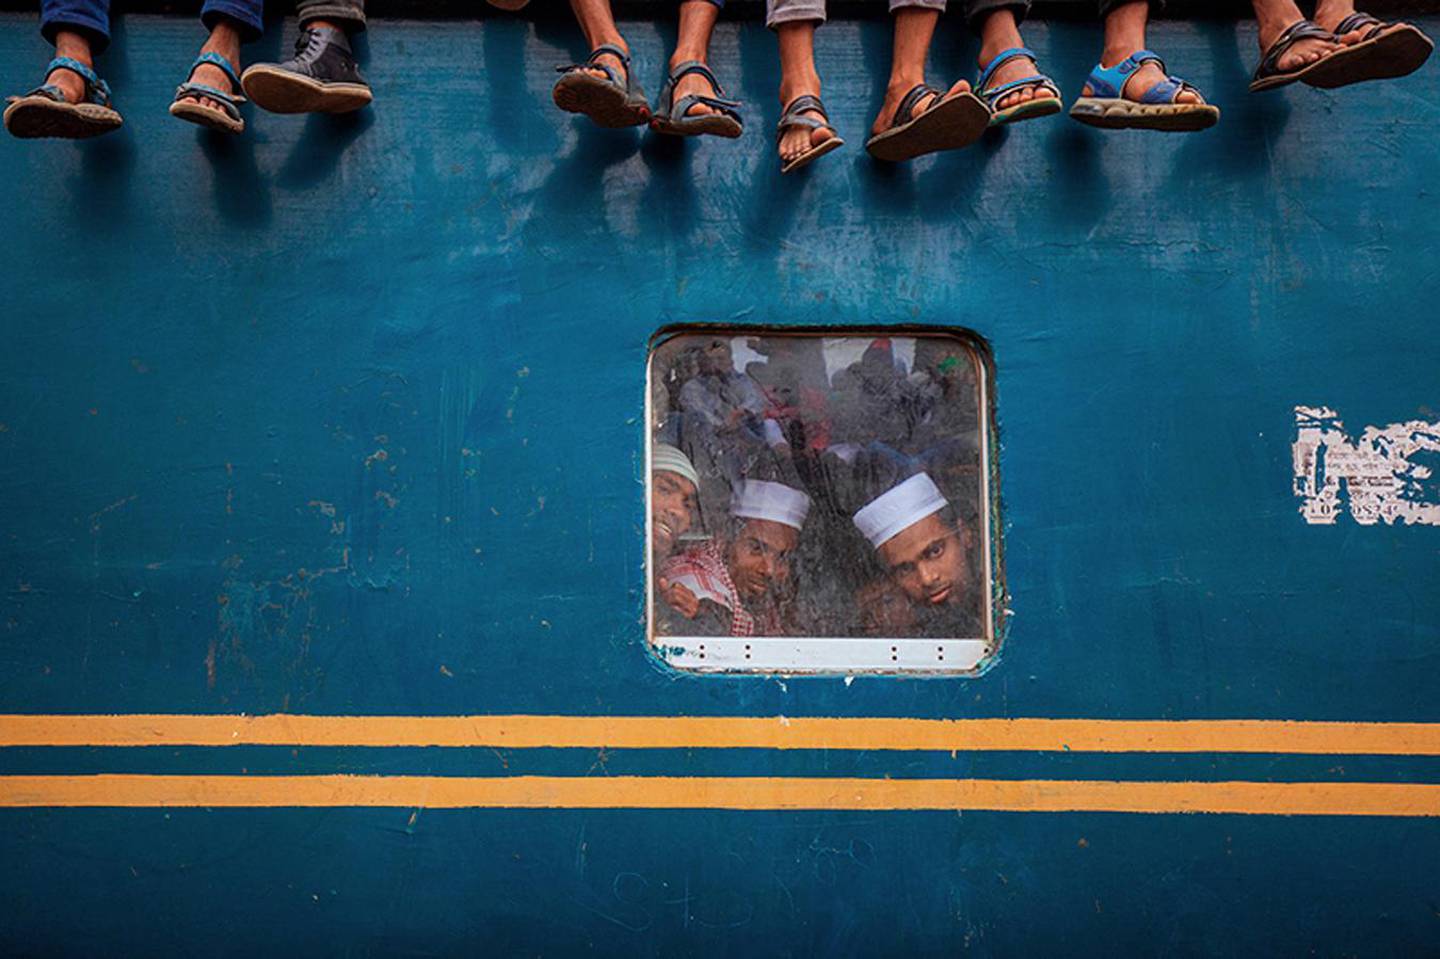 Wei Fu's 'People on a Train' won the prize for best travel photograph. Courtesy Wei Fu